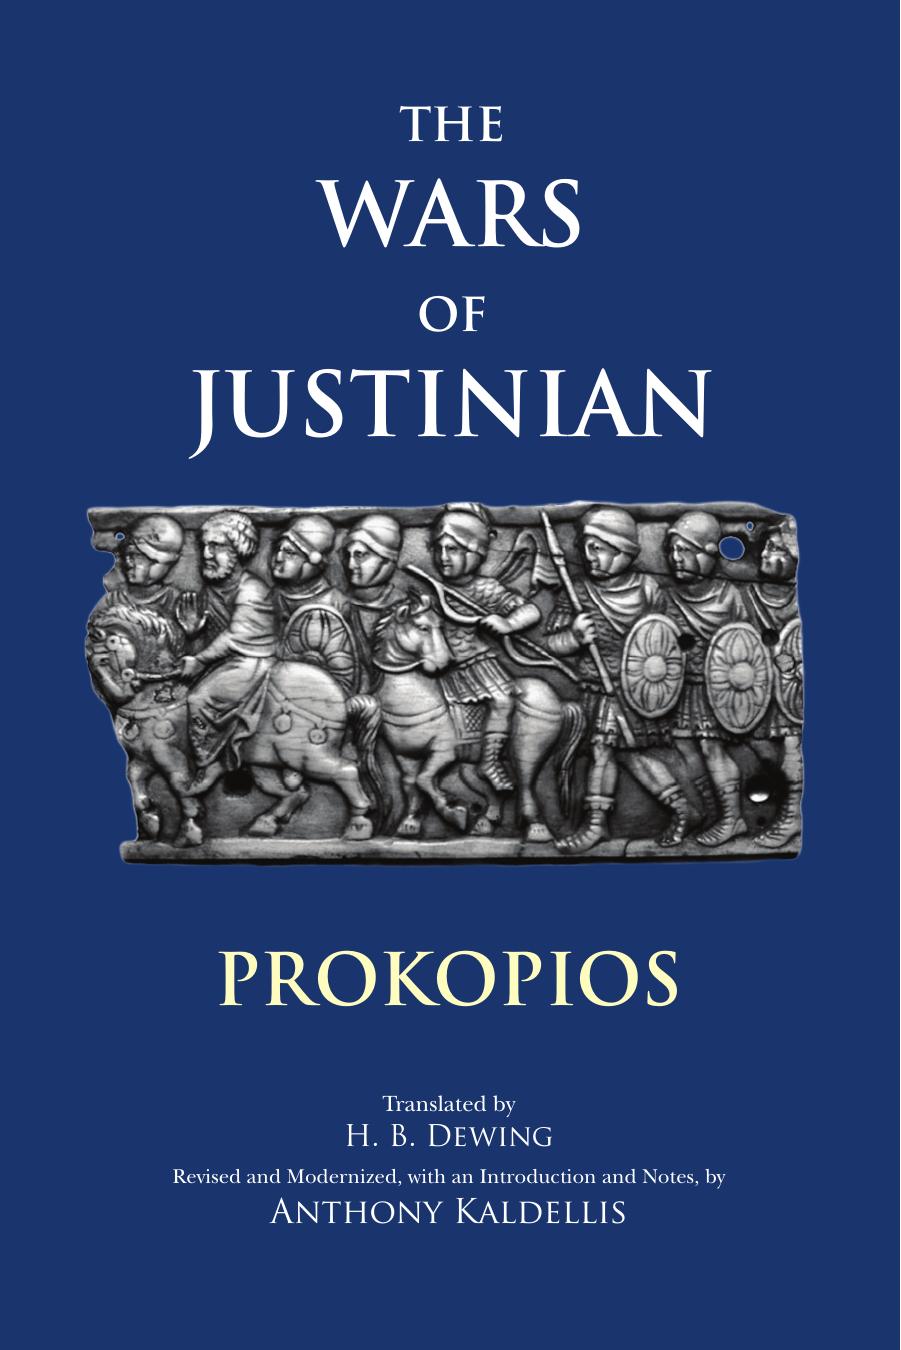 The Wars of Justinian by Prokopios